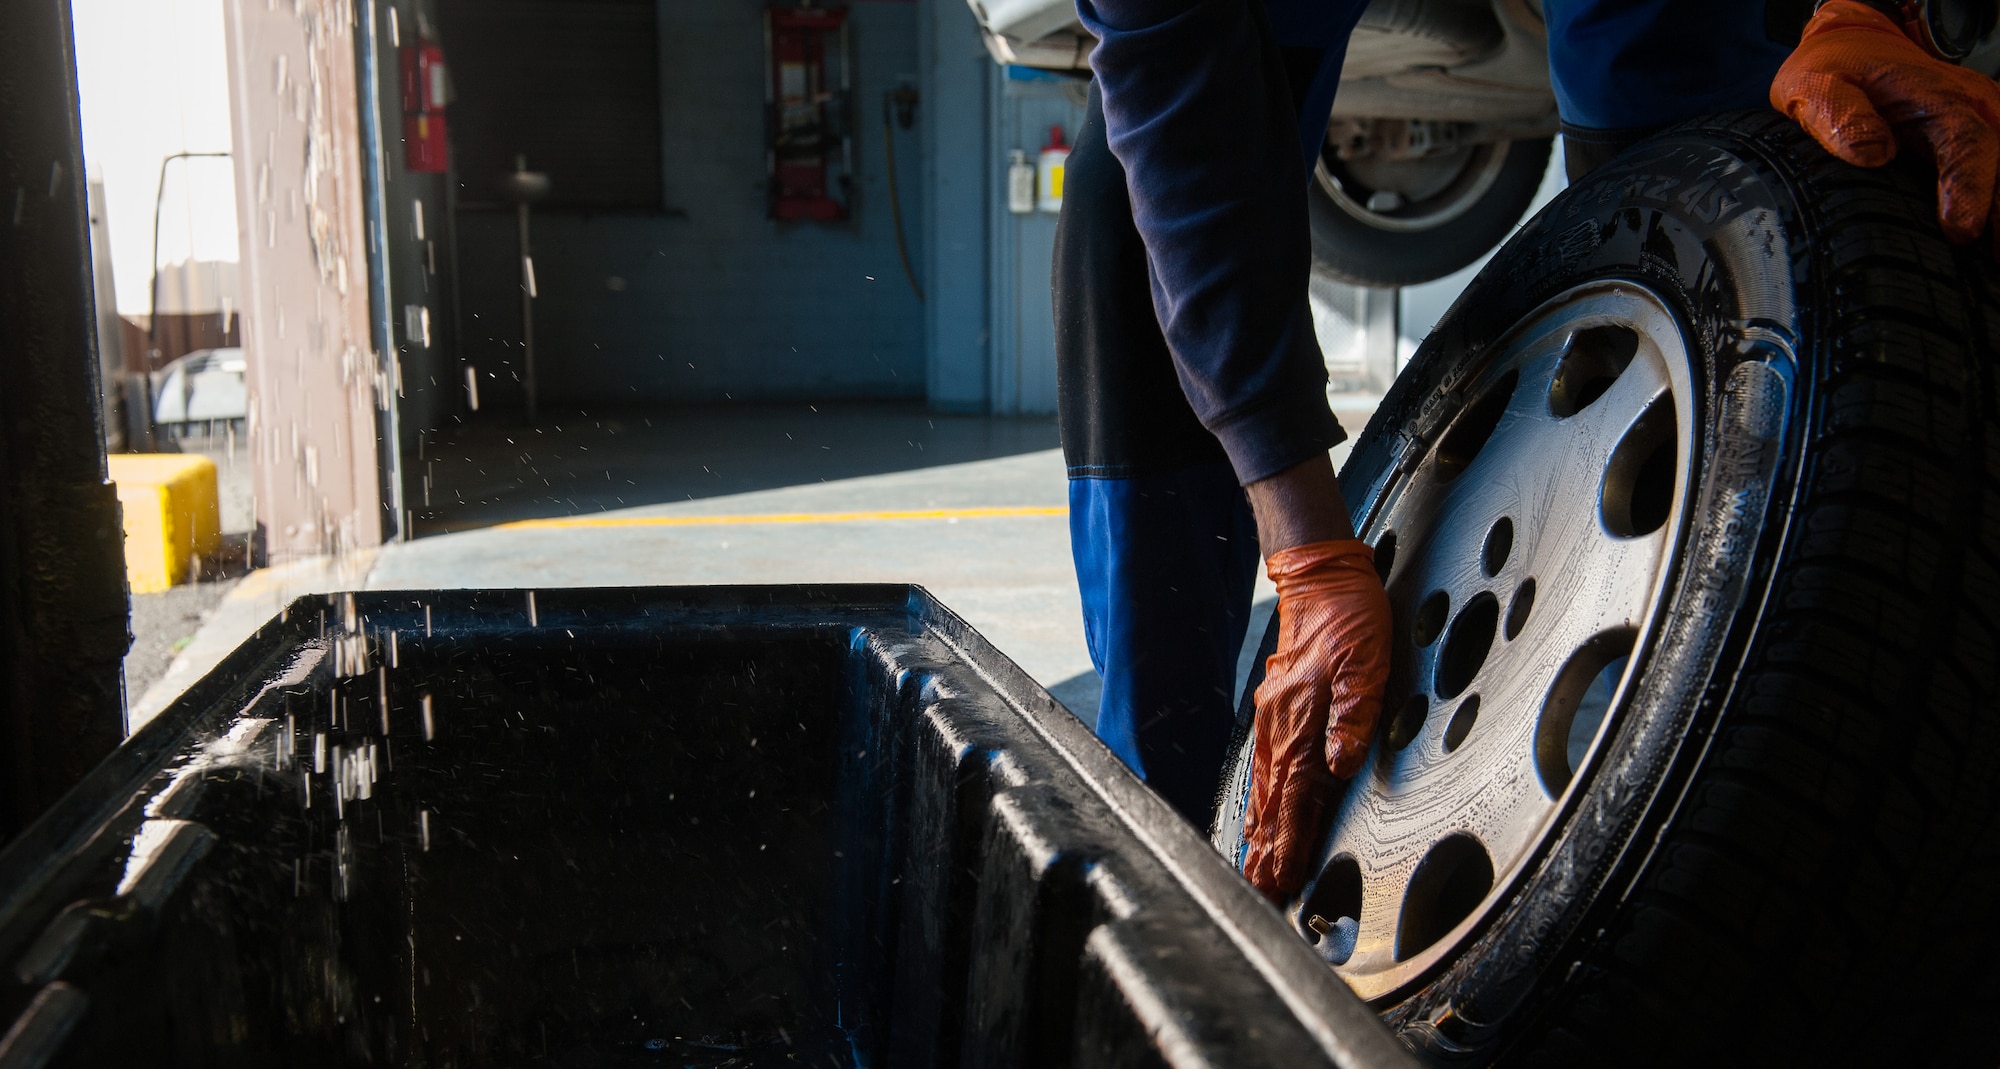 Retired Air Force Master Sgt. Greg Hermann, 86th Force Support Squadron Auto Hobby Shop tire technician, washes a vehicle’s wheel at Ramstein Air Base, Germany, Oct. 5, 2016. To test for air leaks in a tire, Hermann washes the wheel with soap and water, and looks for pockets of air bubbles, an indicator that air is leaking out. (U.S. Air Force photo by Airman 1st Class Lane T. Plummer)